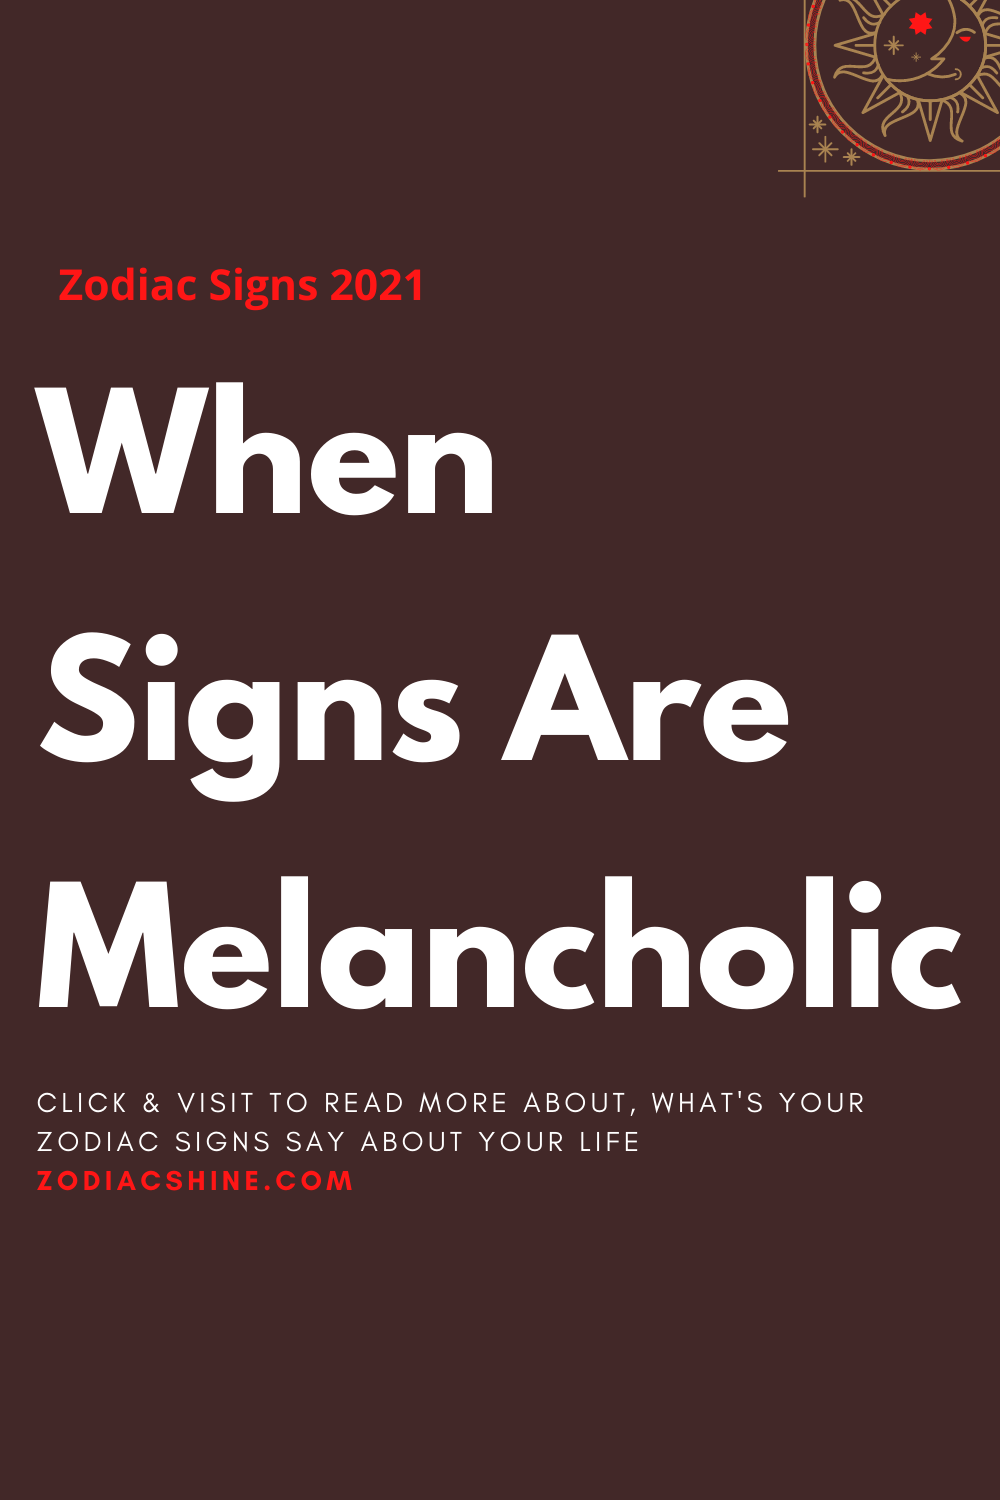 When Signs Are Melancholic